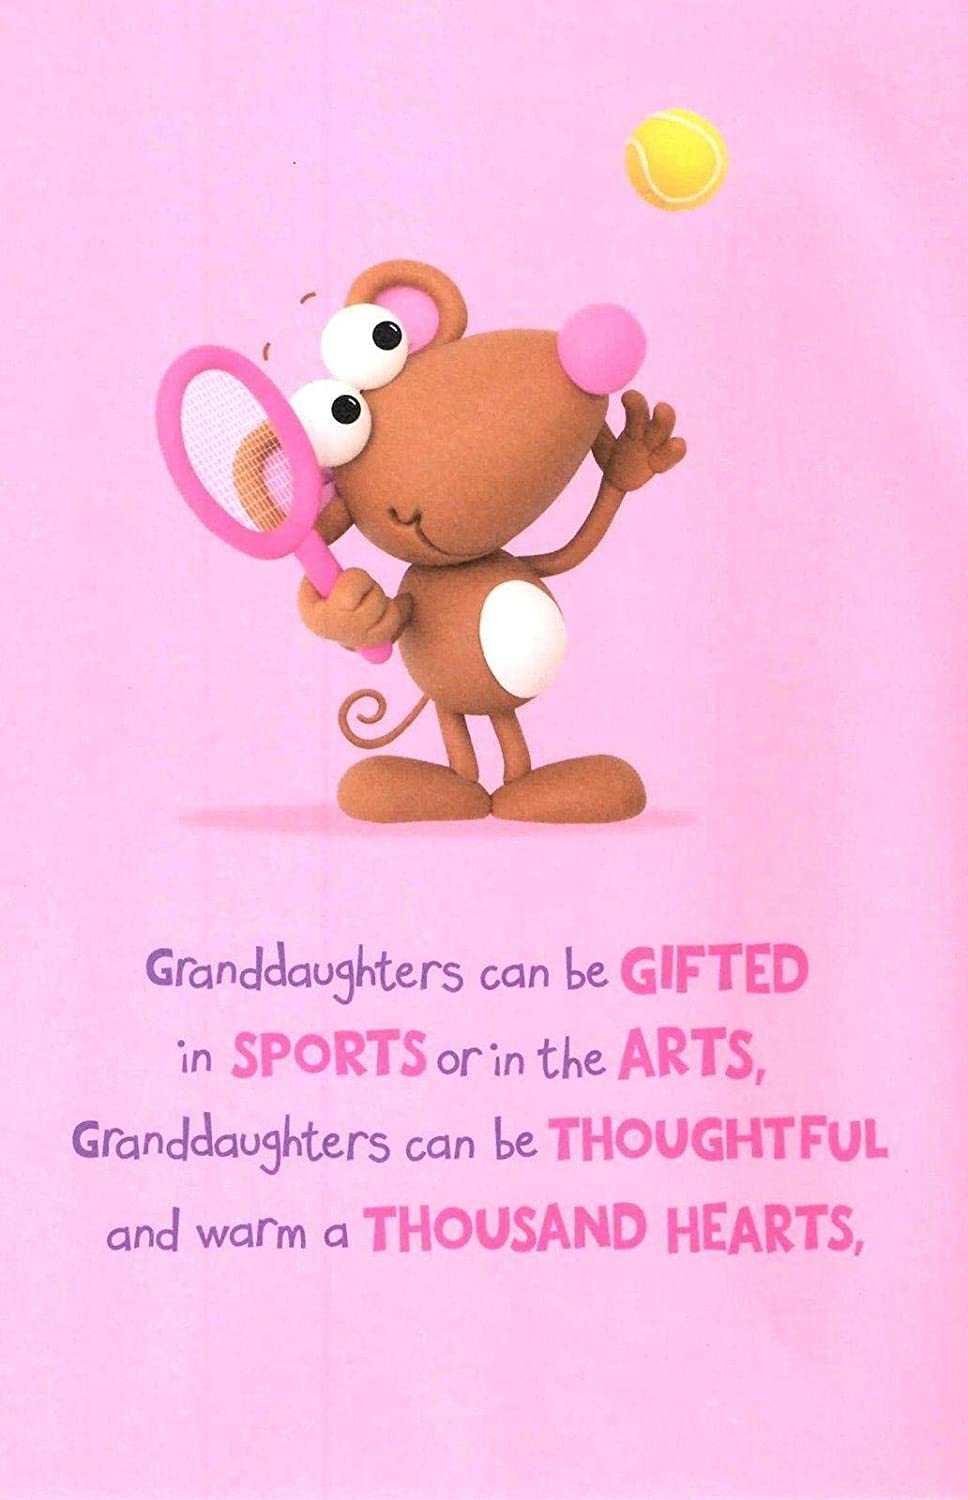 For A Lovely Granddaughter Humour Birthday Card